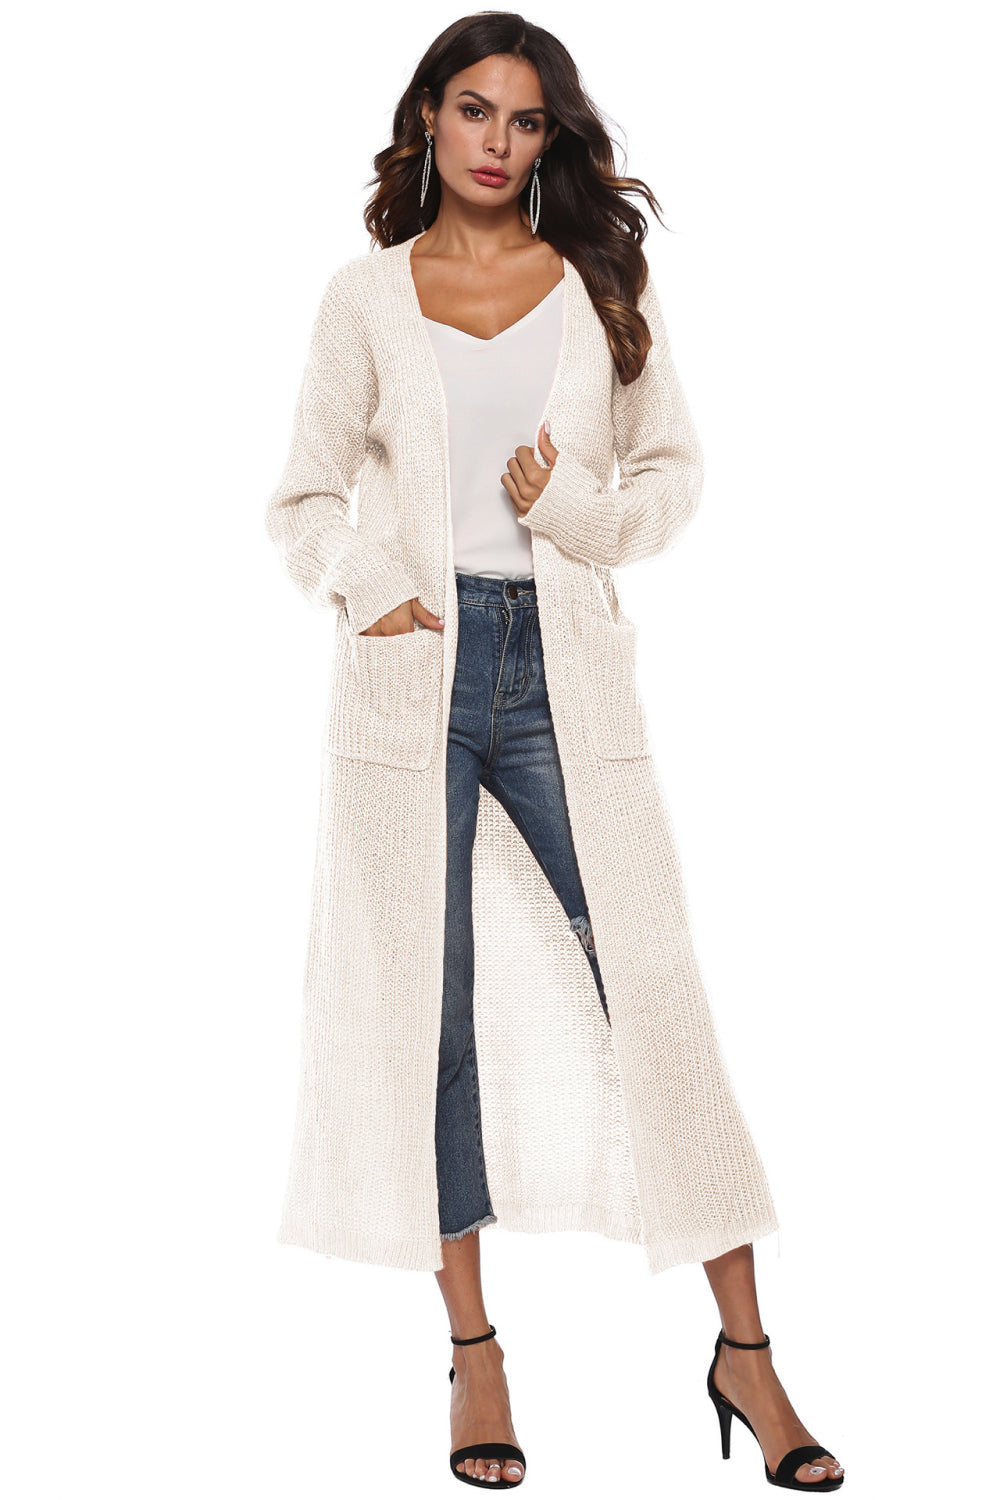 Long Sleeve Open Front Buttoned Cardigan - White / S - Women’s Clothing & Accessories - Shirts & Tops - 16 - 2024